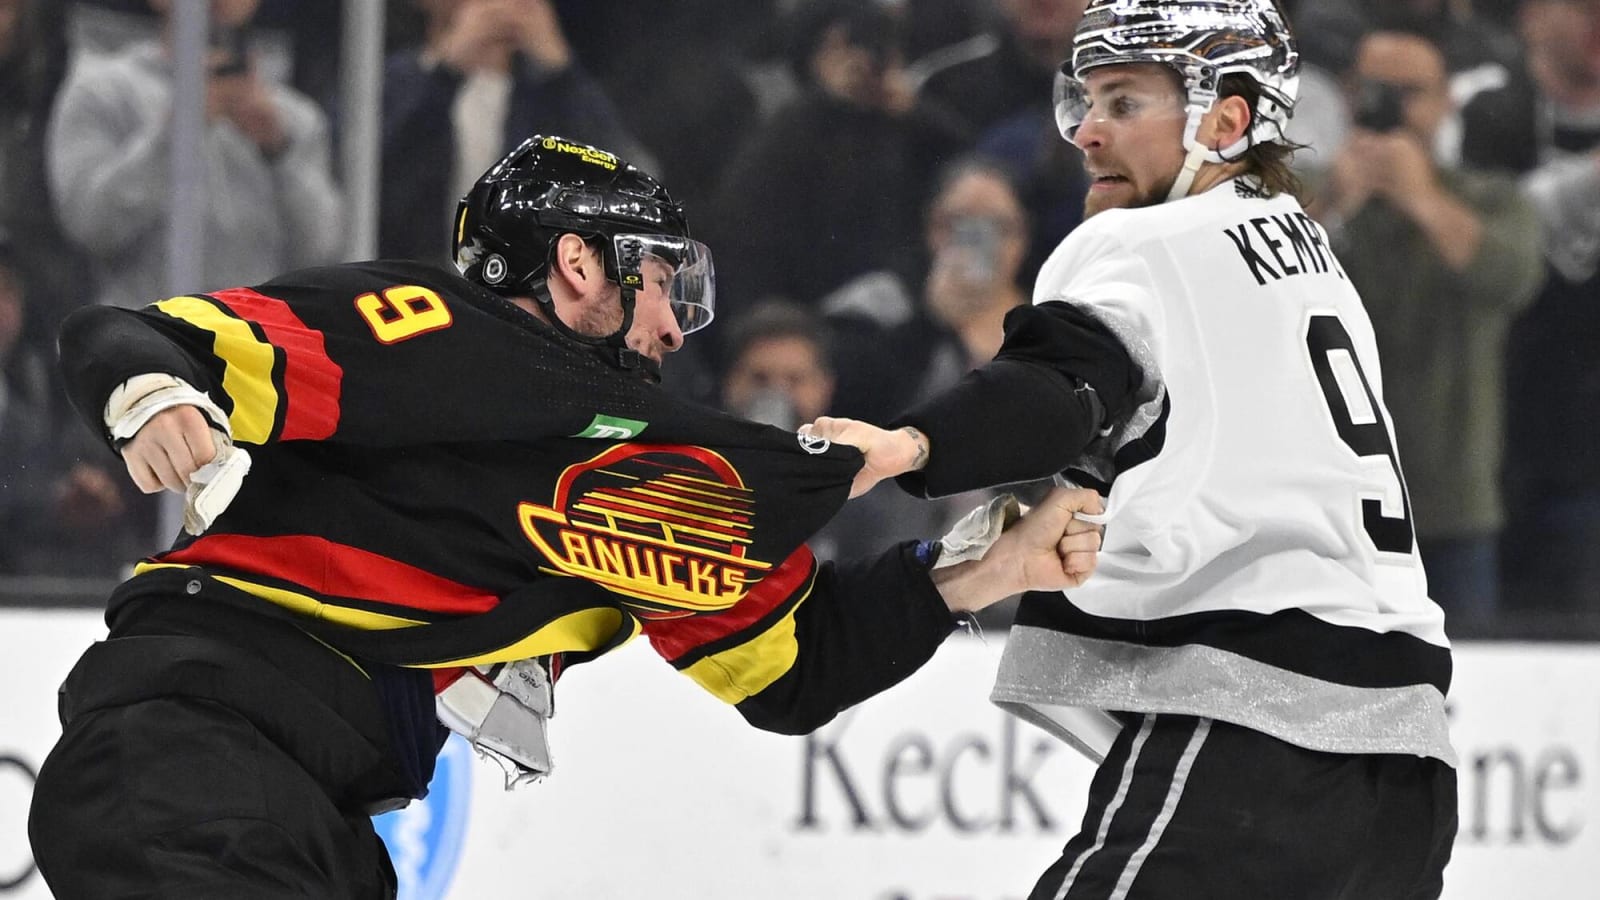 Canucks vs Kings: A rivalry in the making?